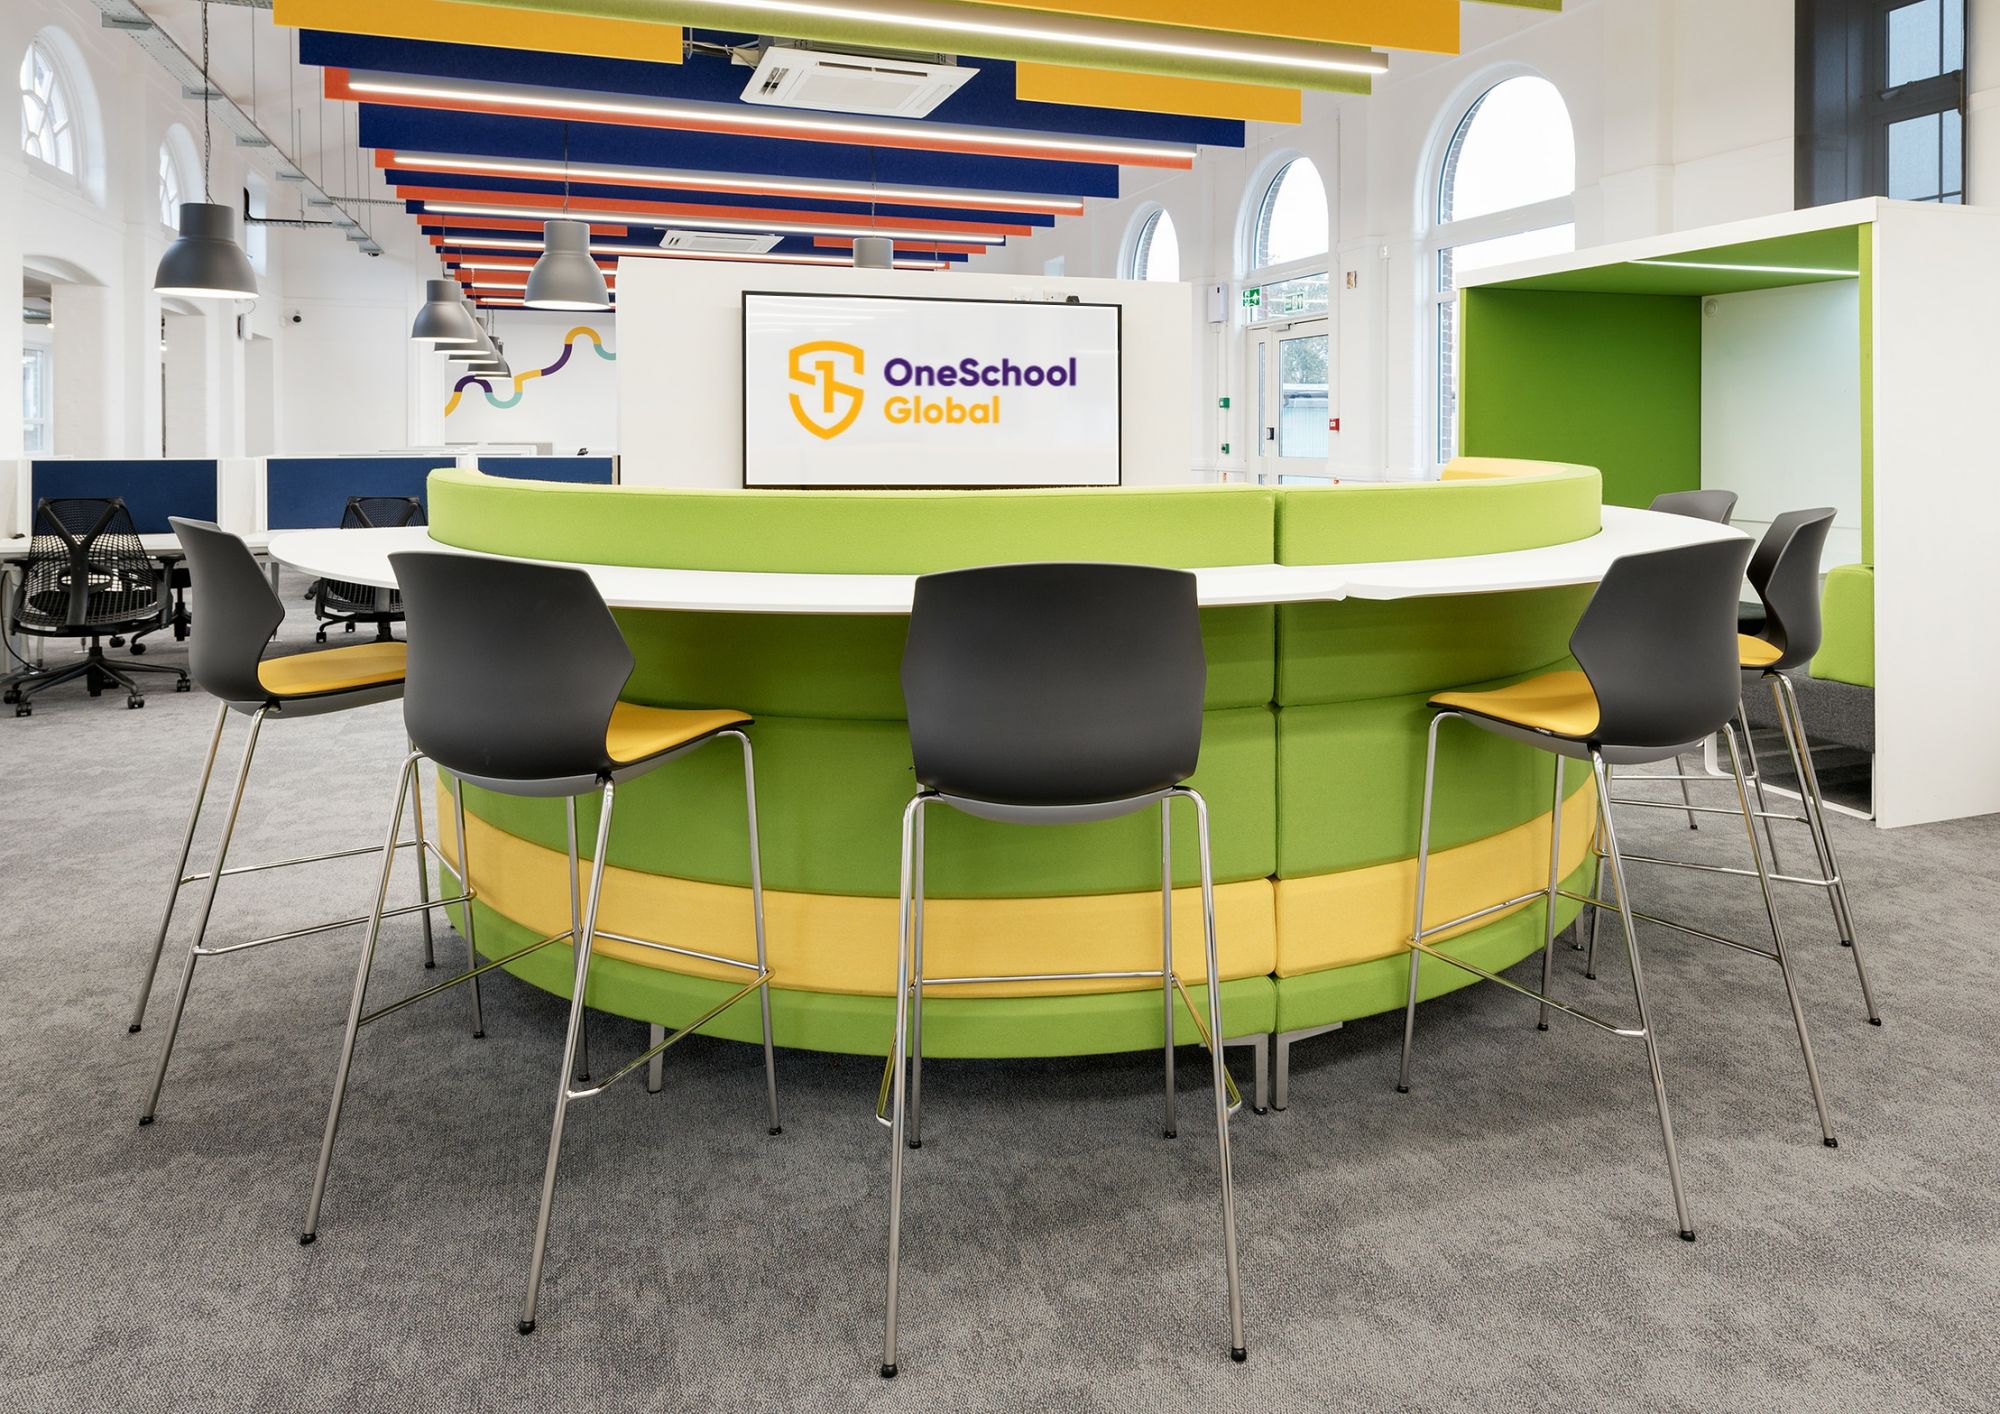 Student dynamic zone chairs and tables